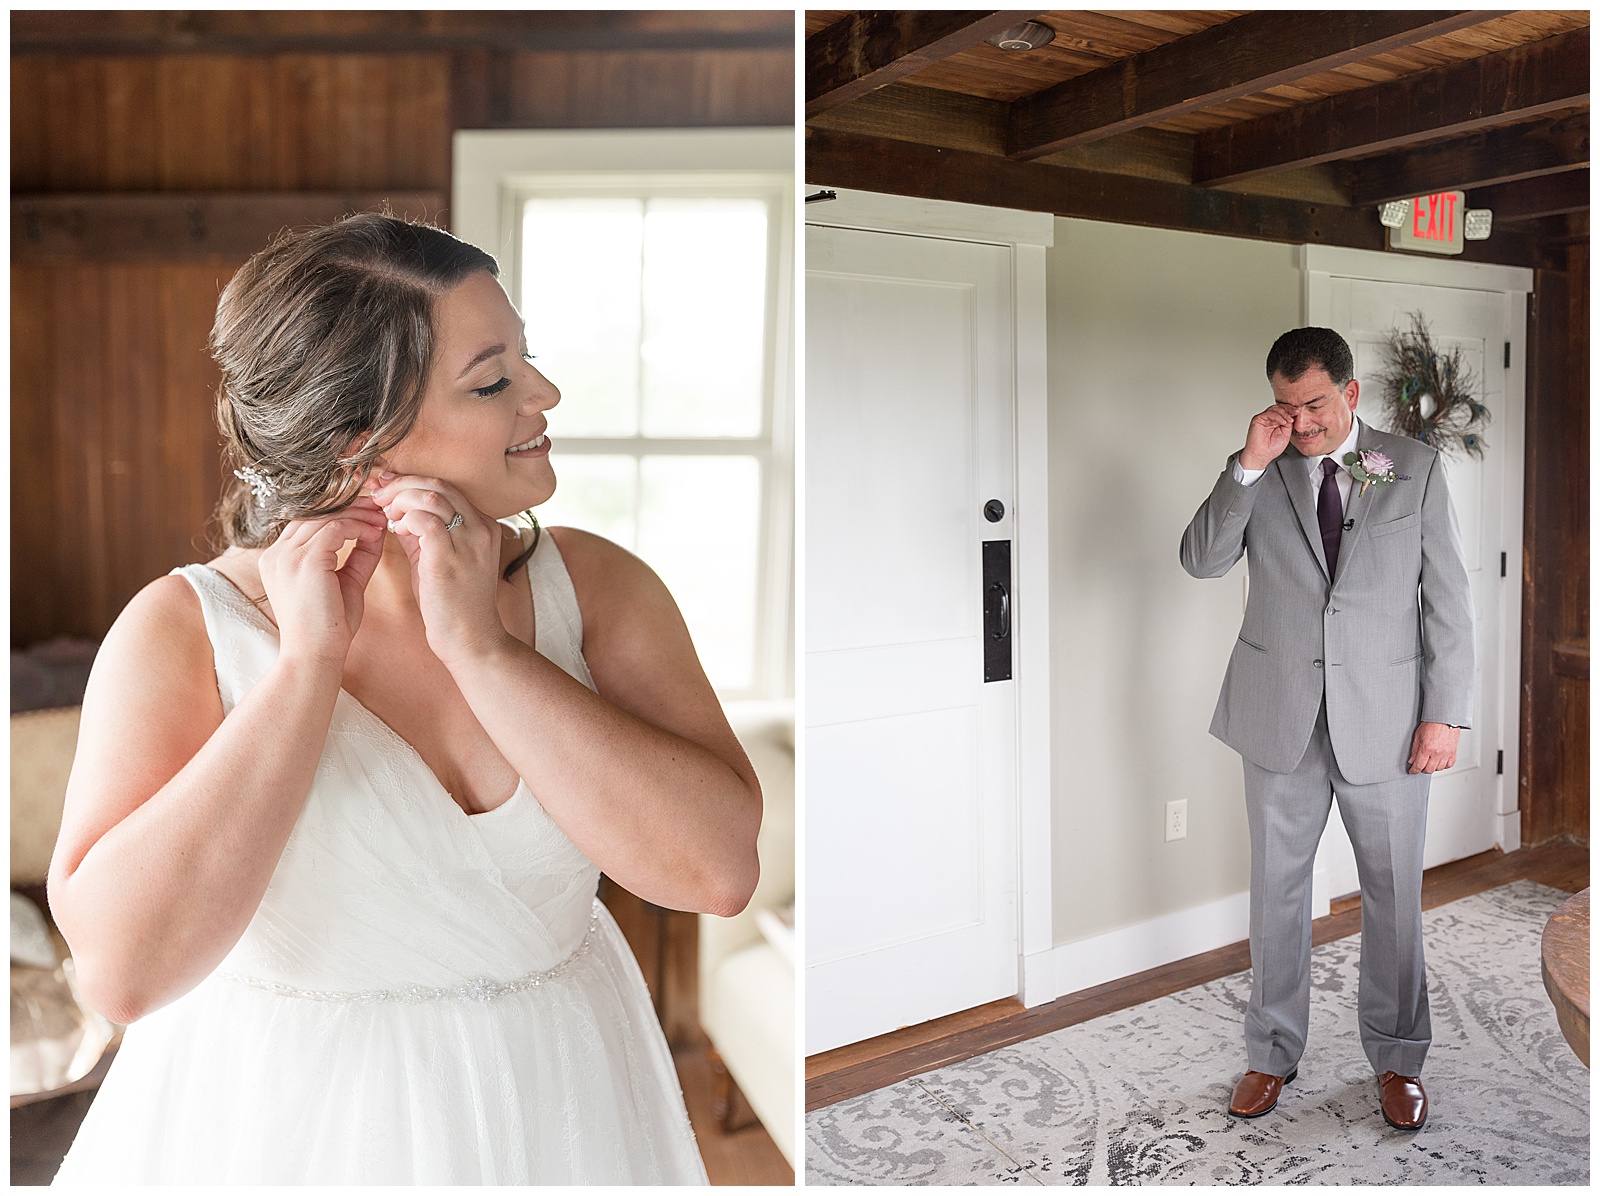 bride adjusts her right earring as she does the final touches before seeing her groom for the first look